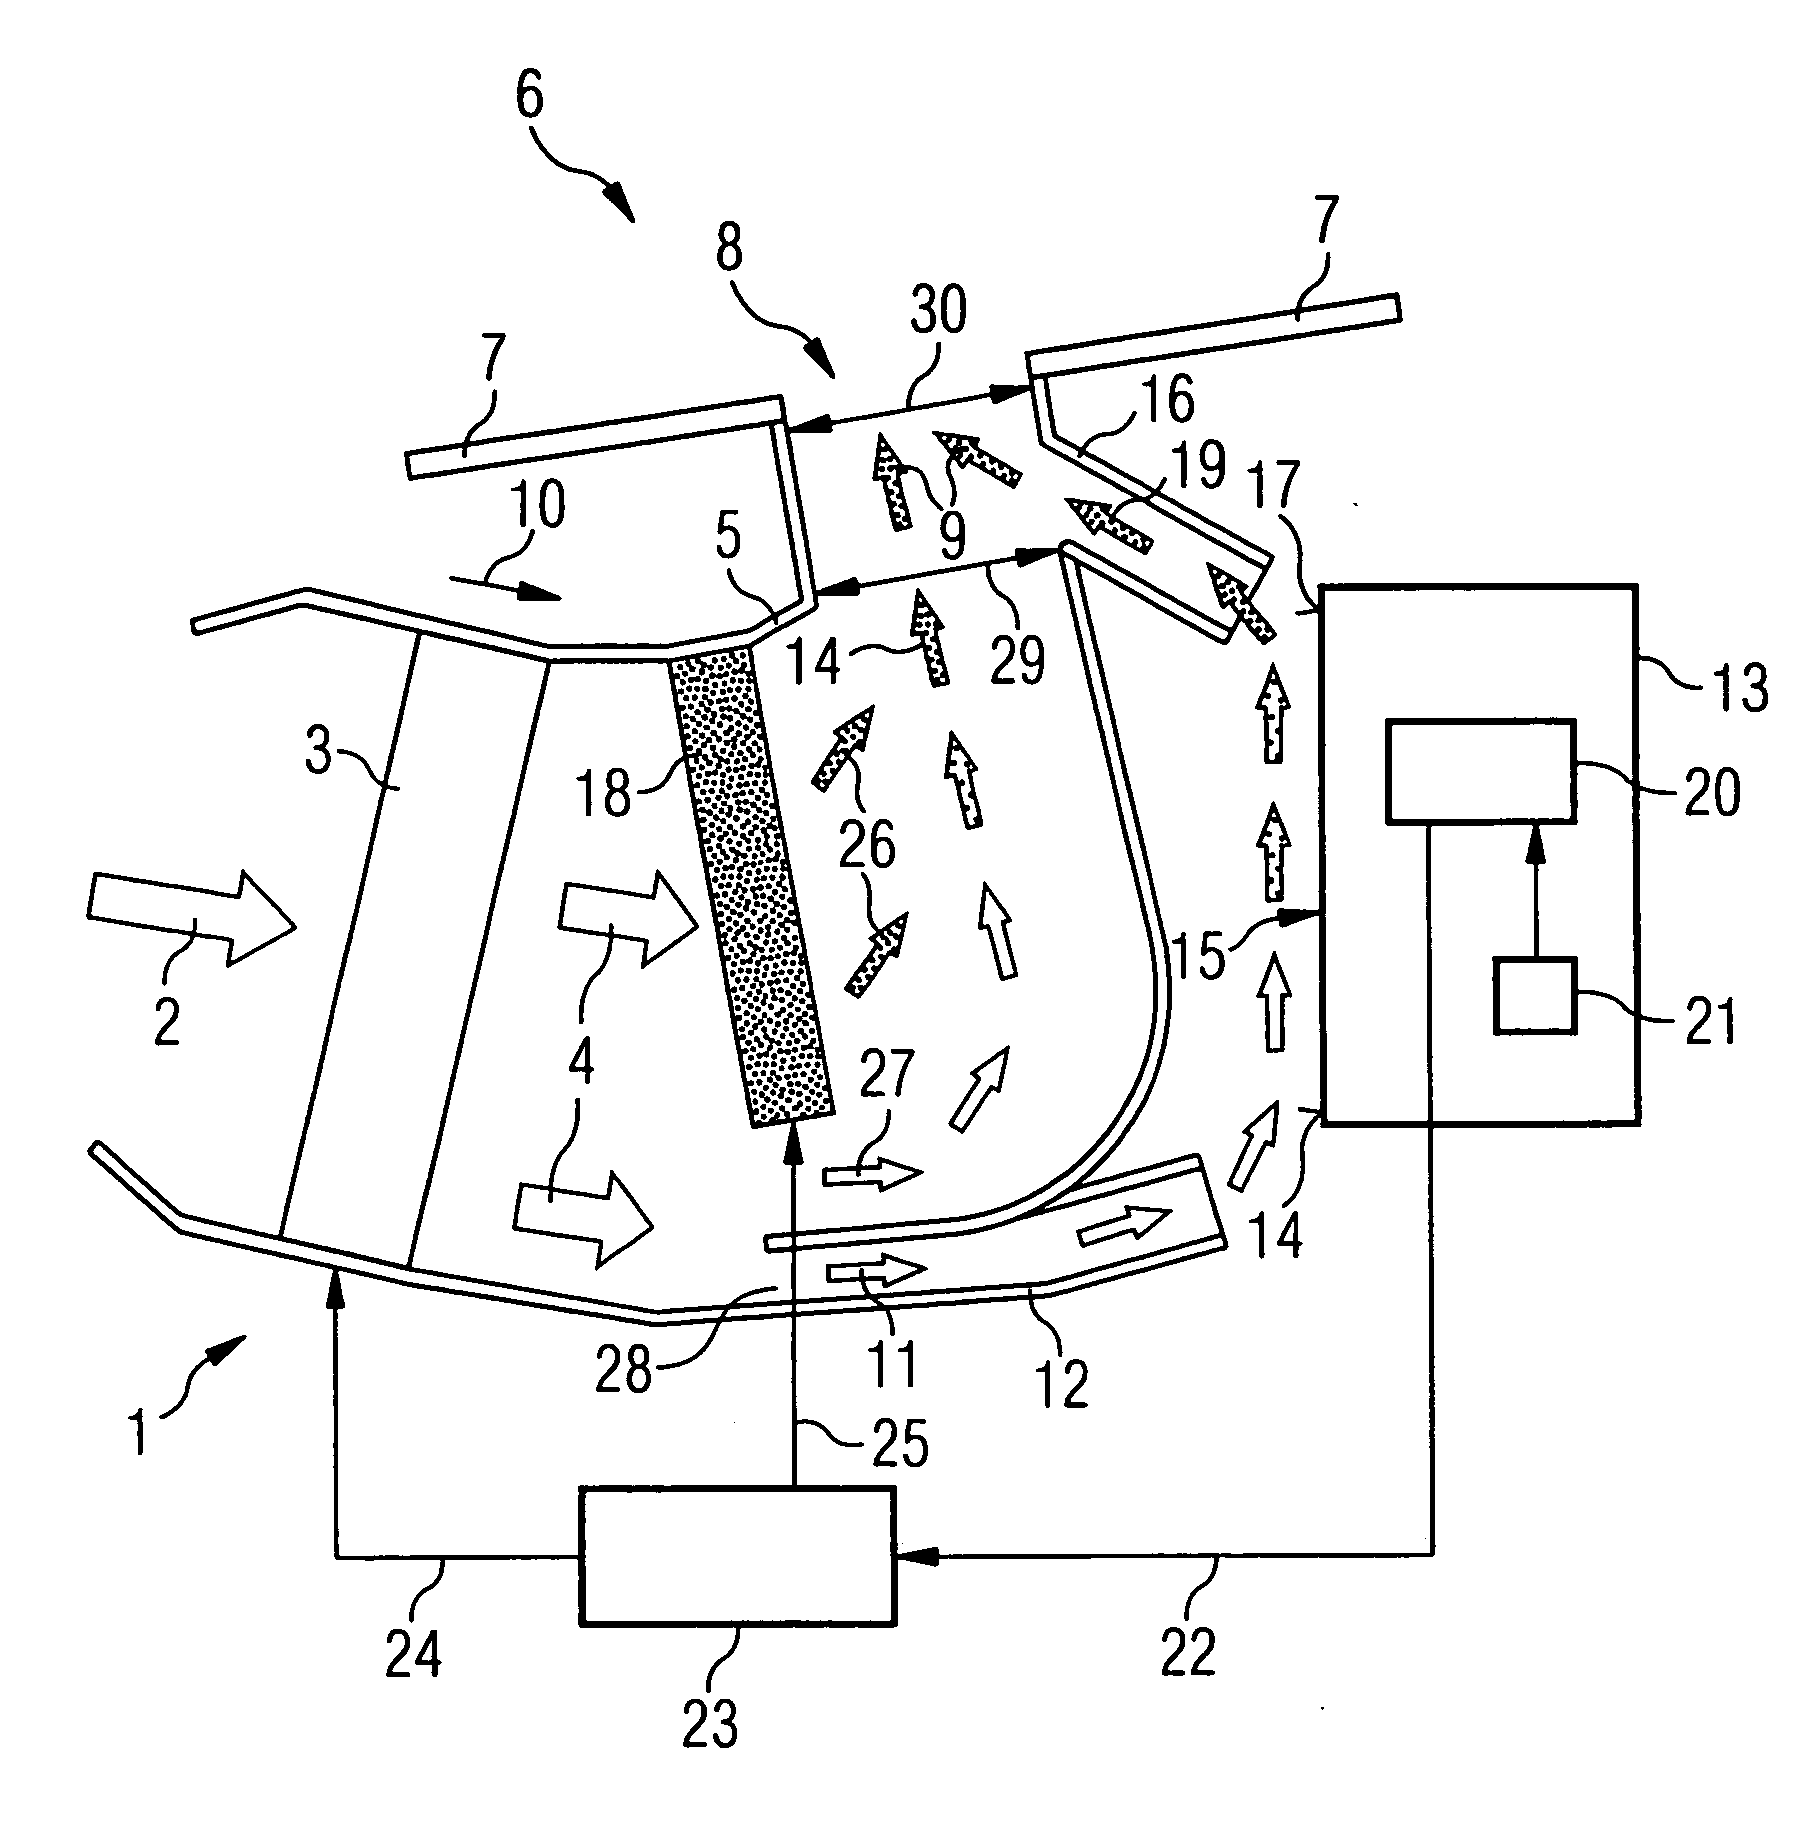 Arrangement for cooling components in a vehicle